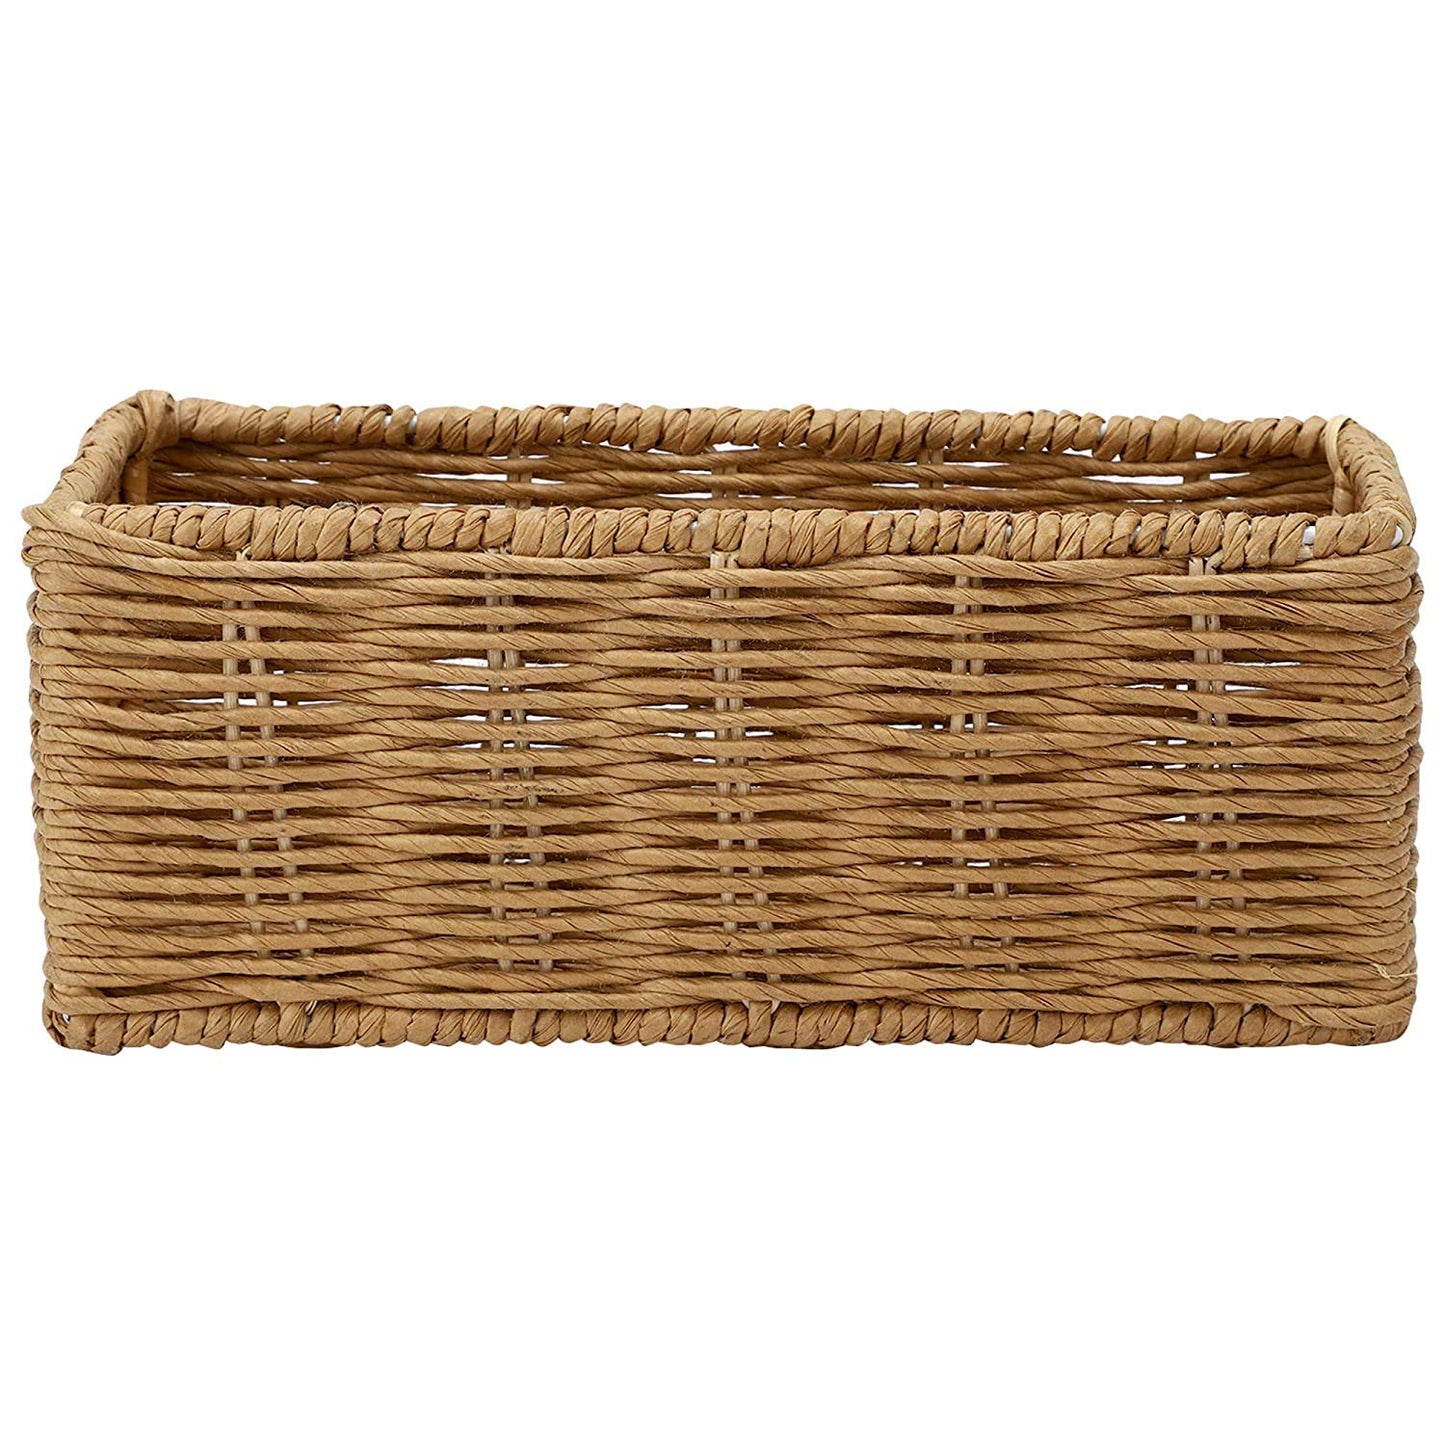 AKWAY Handmade Wicker Basket Bathroom Vanity Tray for Toilet Paper and Soap, Wicker Kitchen Counter Top Storage Shelf Coffee Table Decorative Tray Cosmetic Organizer Display Holder, Rectangular - Akway